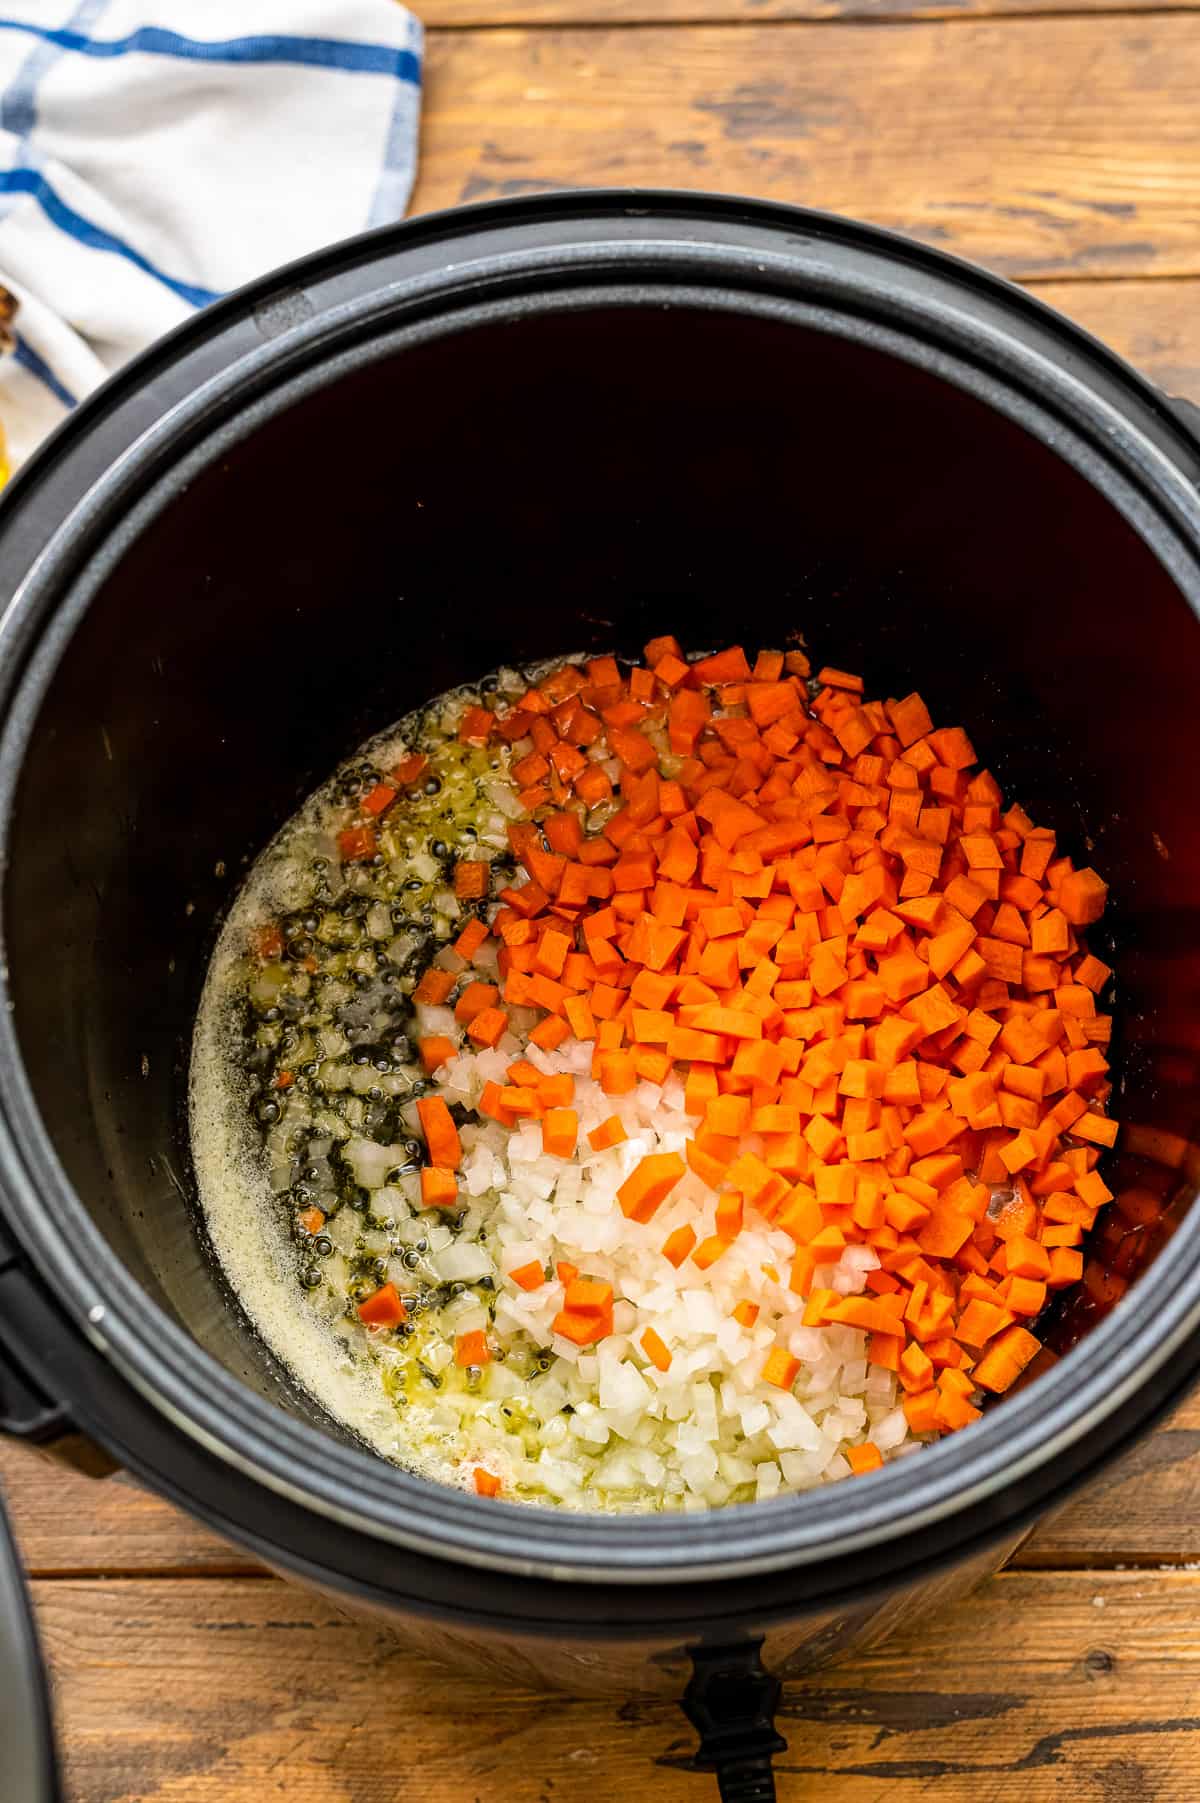 Ingredients for chicken and rice in Instant Pot